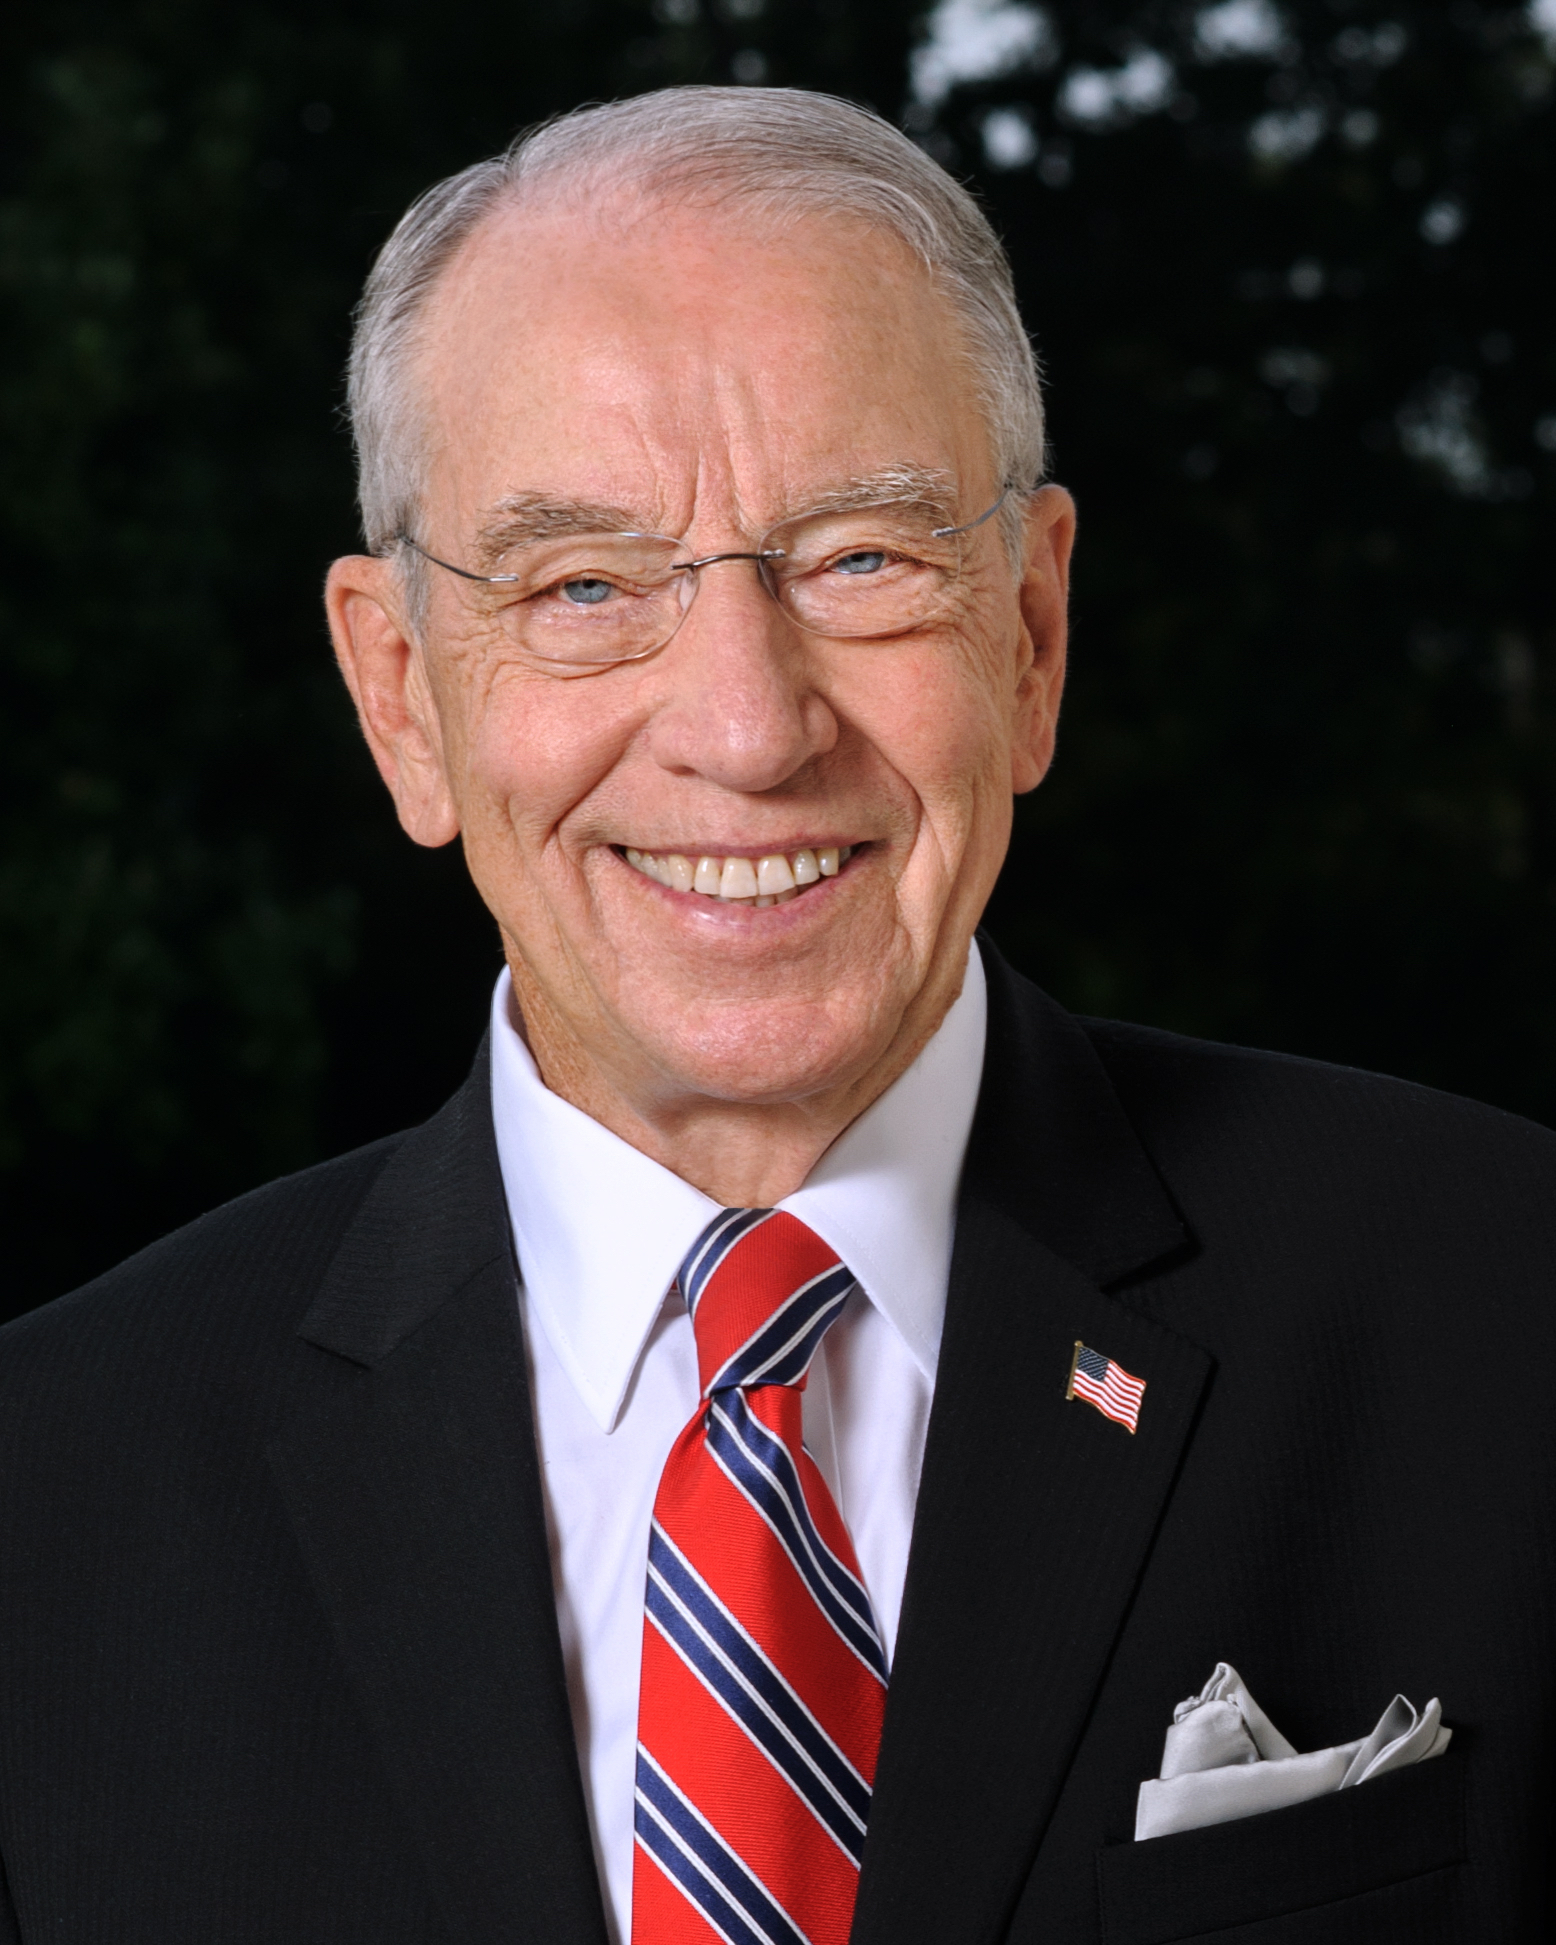 FASFA Farm: Headshot of older man with gray hair in black suit, white shirt and red/blue striped tie smiling broadly into camera.